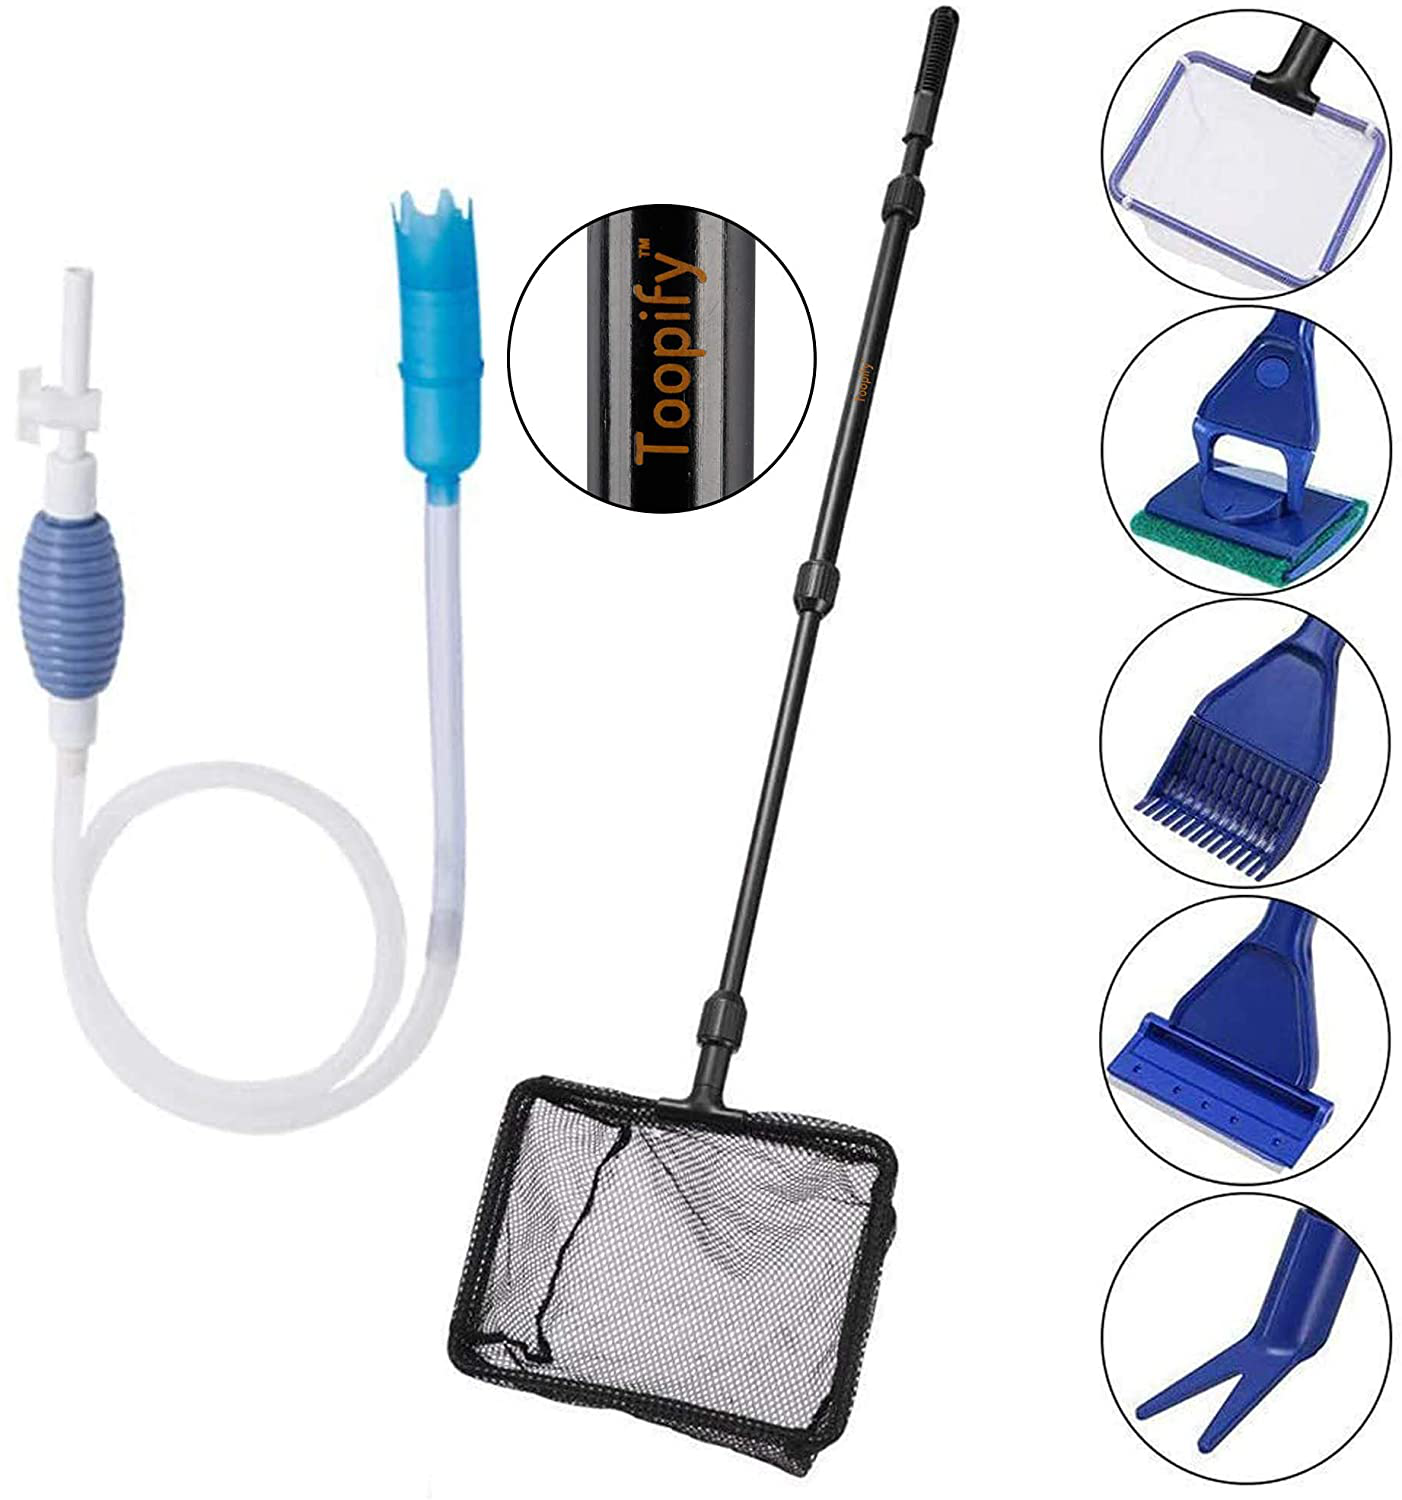 Toopify Aquarium Fish Tank Cleaning Tools, 7 in 1 Adjustable Cleaning Kit & Fish Tank Gravel Cleaner Siphon for Water Changing and Sand Cleaner Animals & Pet Supplies > Pet Supplies > Fish Supplies > Aquarium Cleaning Supplies Toopify   